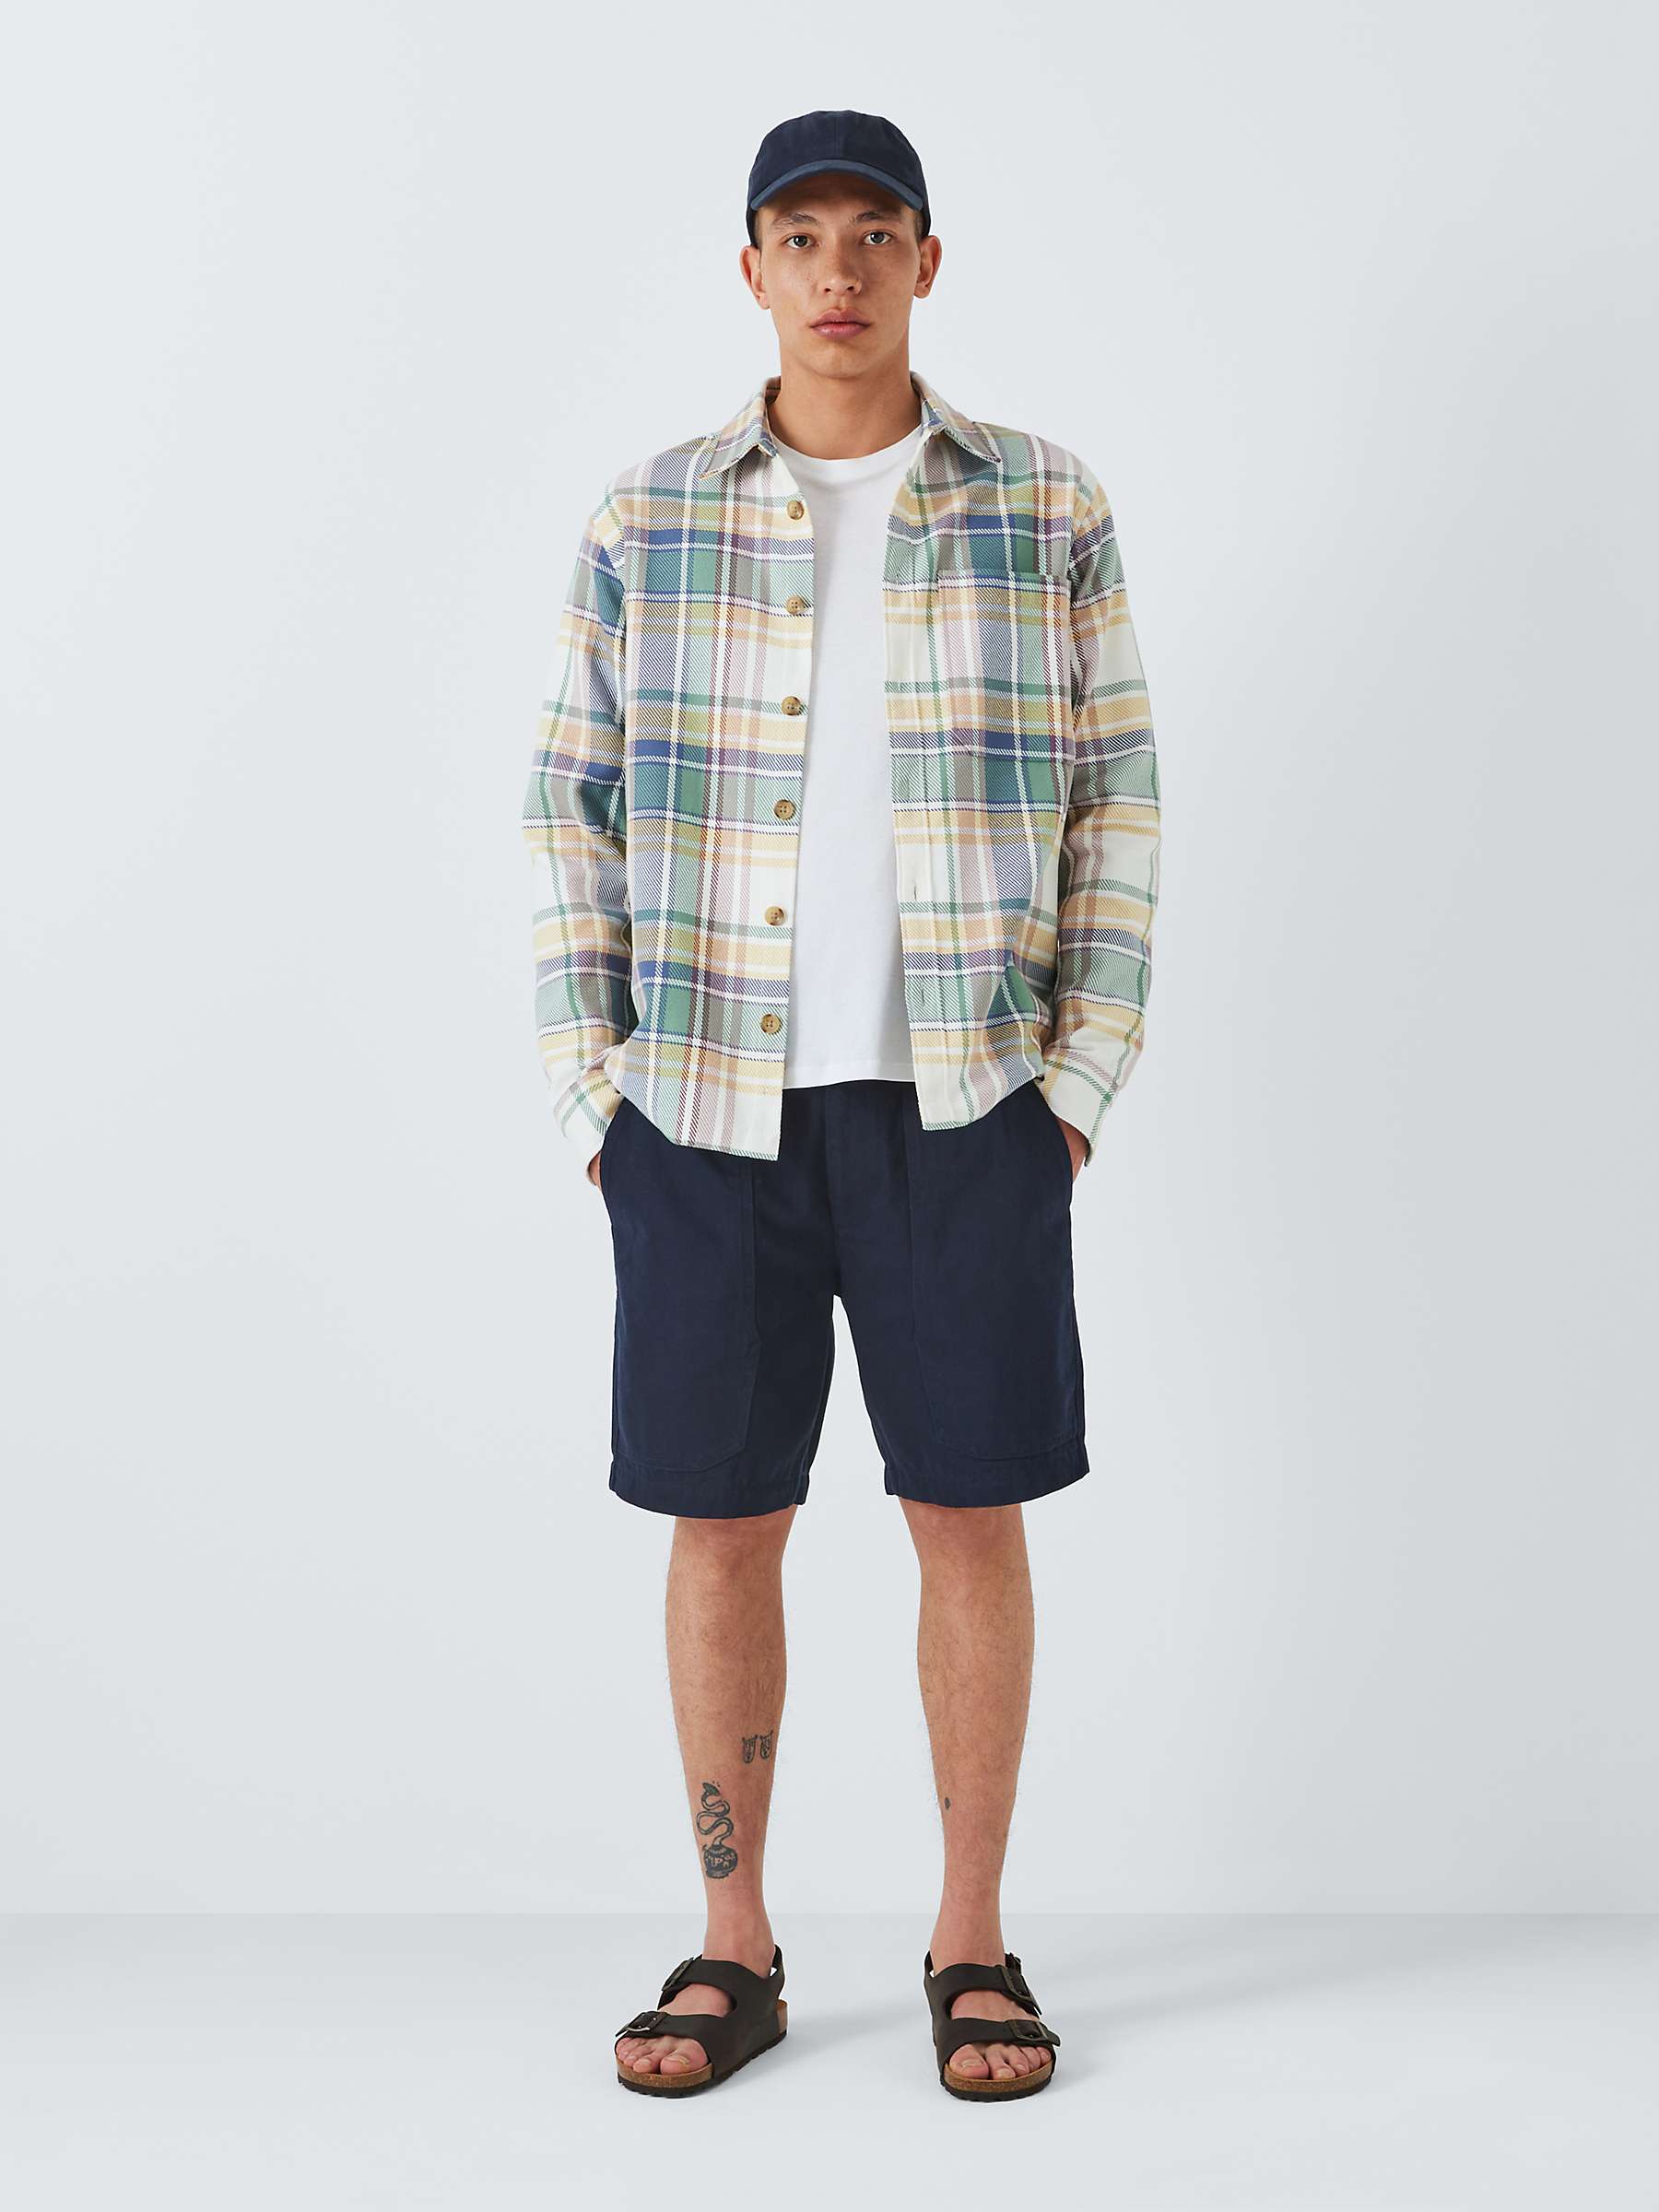 Buy John Lewis ANYDAY Double Knee Shorts Online at johnlewis.com